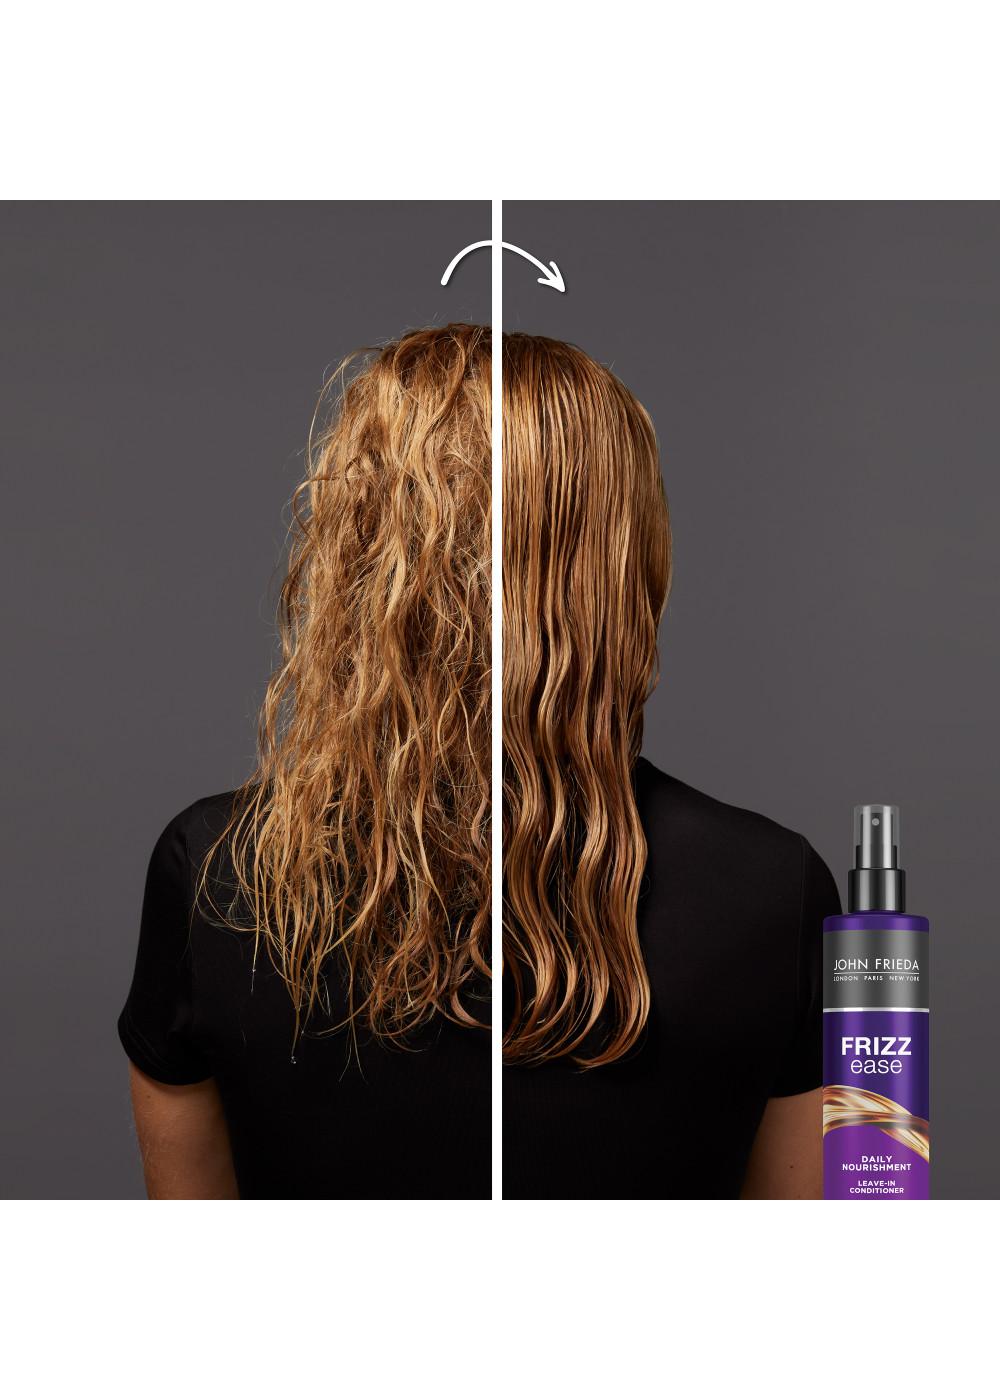 John Frieda Frizz Ease Daily Nourishment Leave-In Conditioner; image 6 of 9